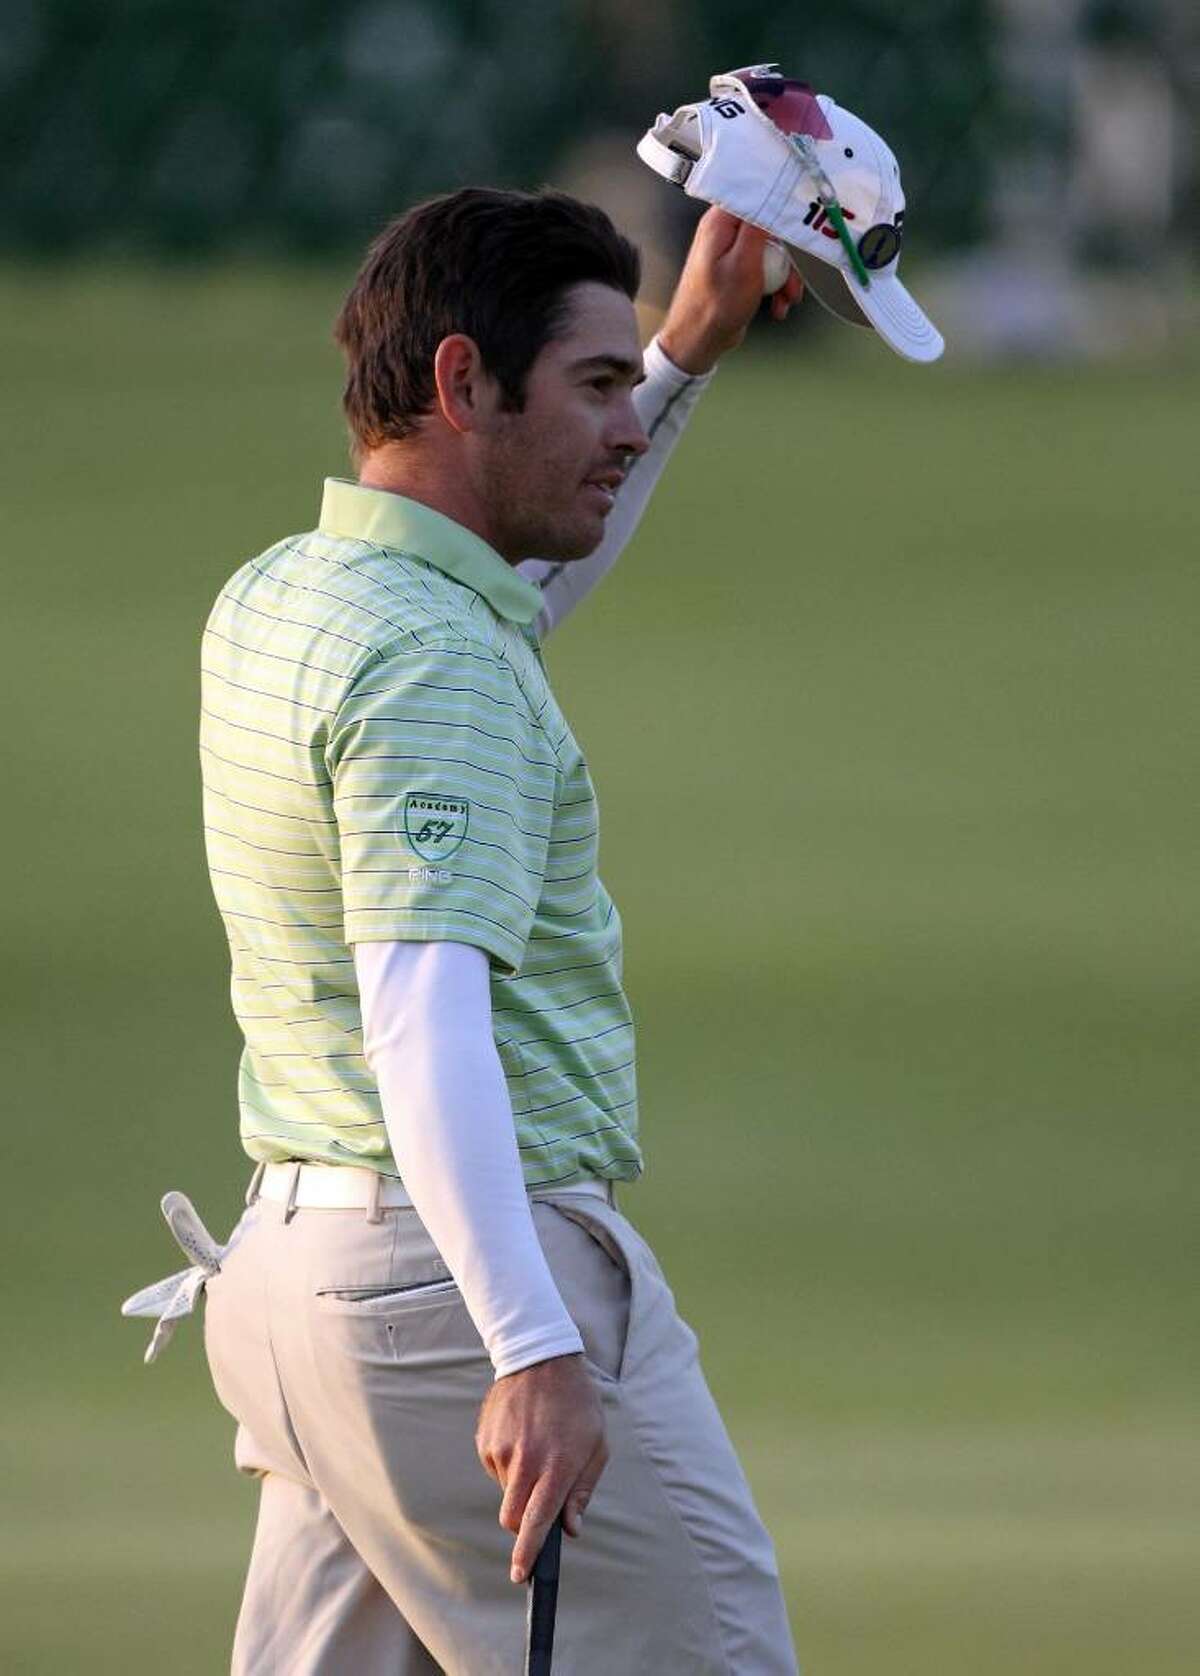 South Africa's Louis Oosthuizen waves to the crowd on the 18th green after completing his third round of the British Open Golf Championship on the Old Course at St. Andrews, Scotland, Saturday, July 17, 2010. (AP Photo/Peter Morrison)